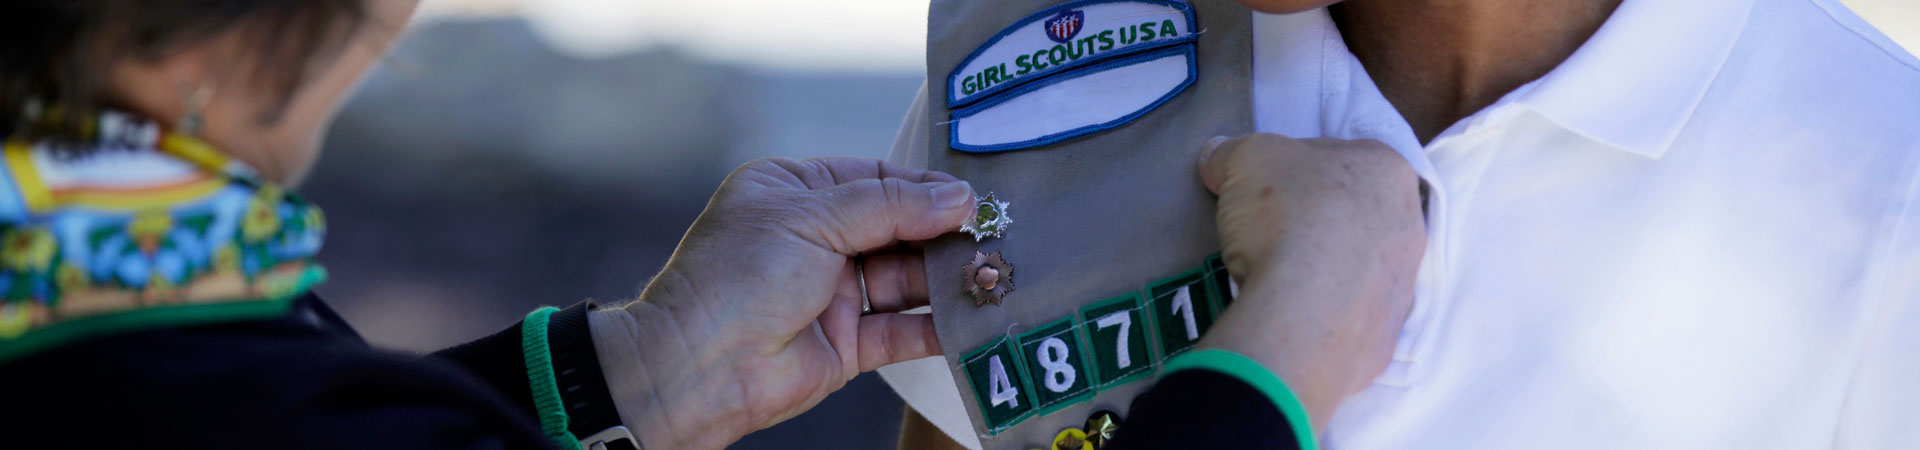  Two hands attach a silver pin to a Girl Scouts USA khaki-colored vest embellished with other metallic pins and badges.  